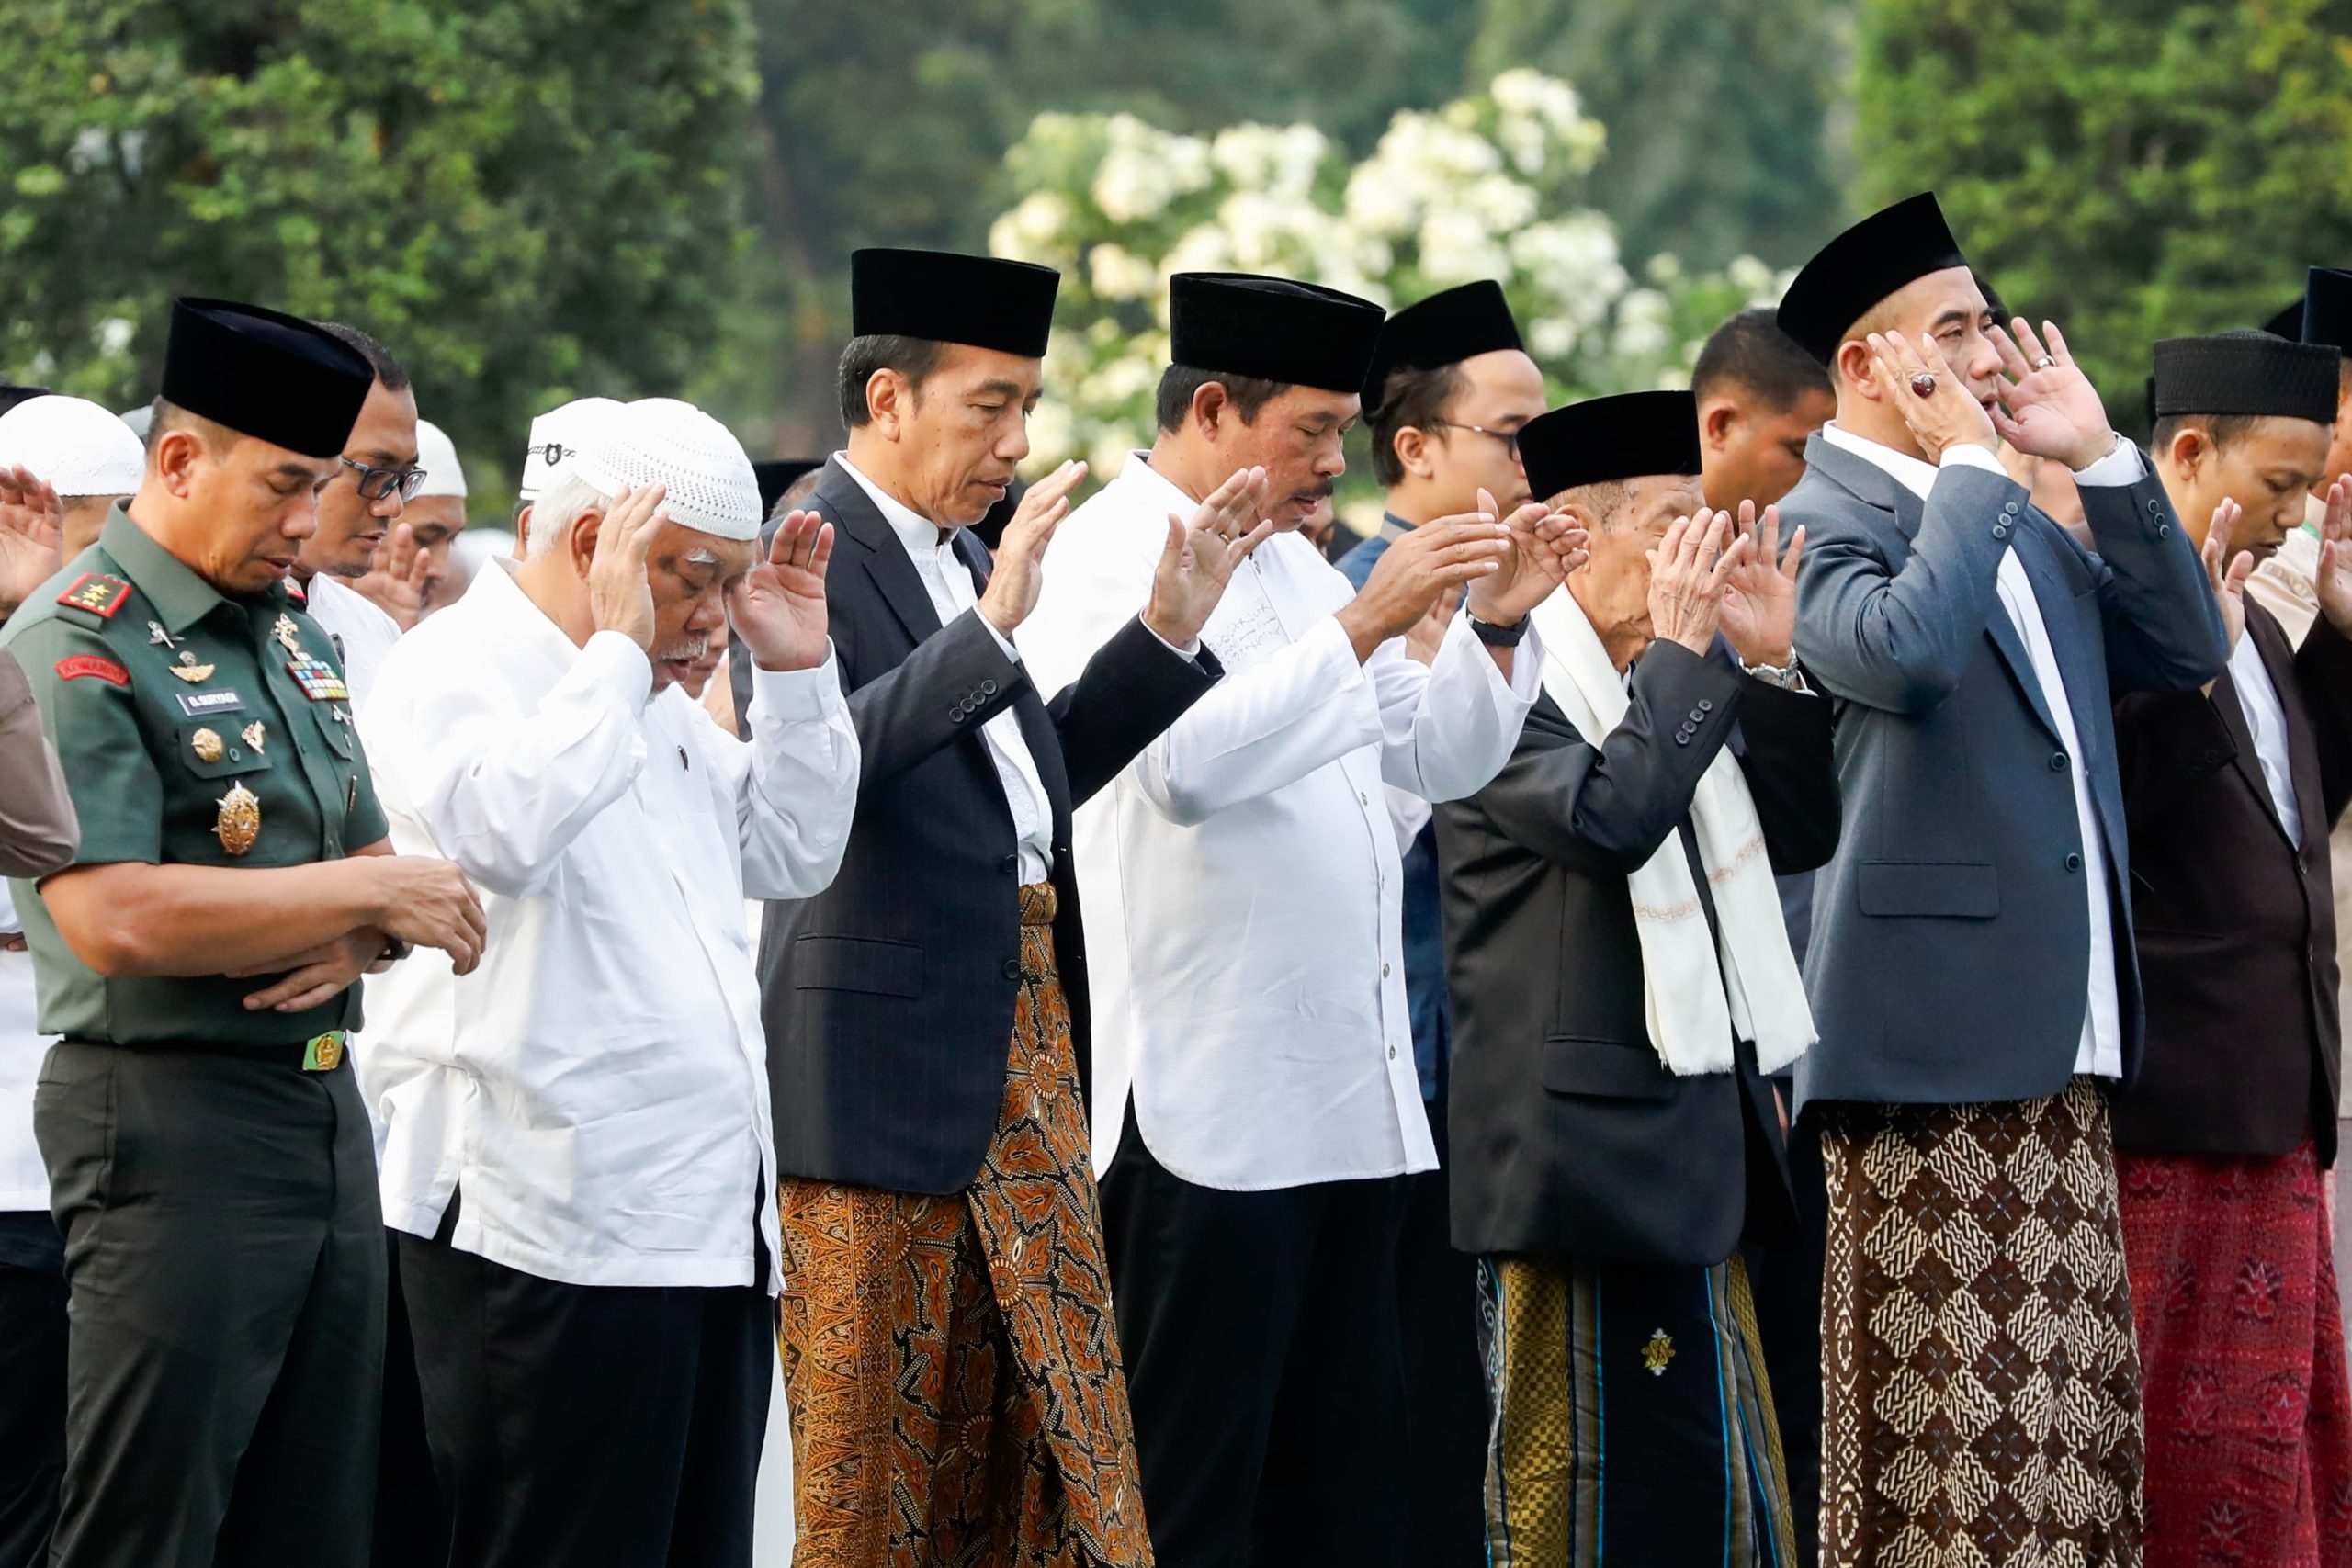 Mingling with the community, President Jokowi and Acting Governor of Central Java pray Eid al-Adha and sacrifice in Semarang